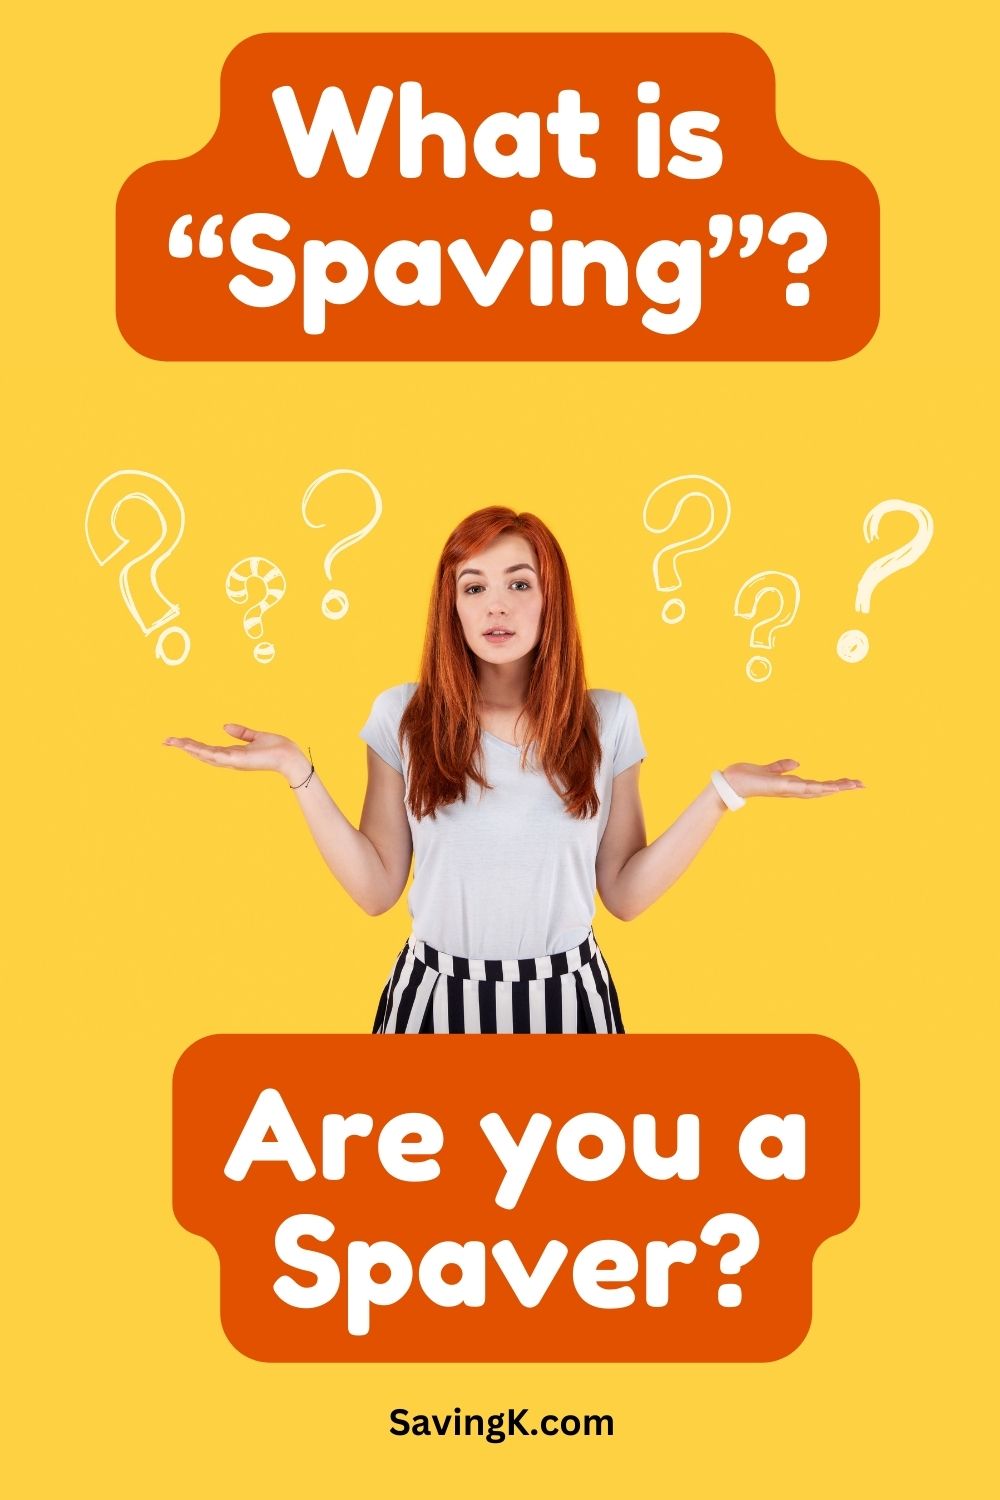 What is Spaving?